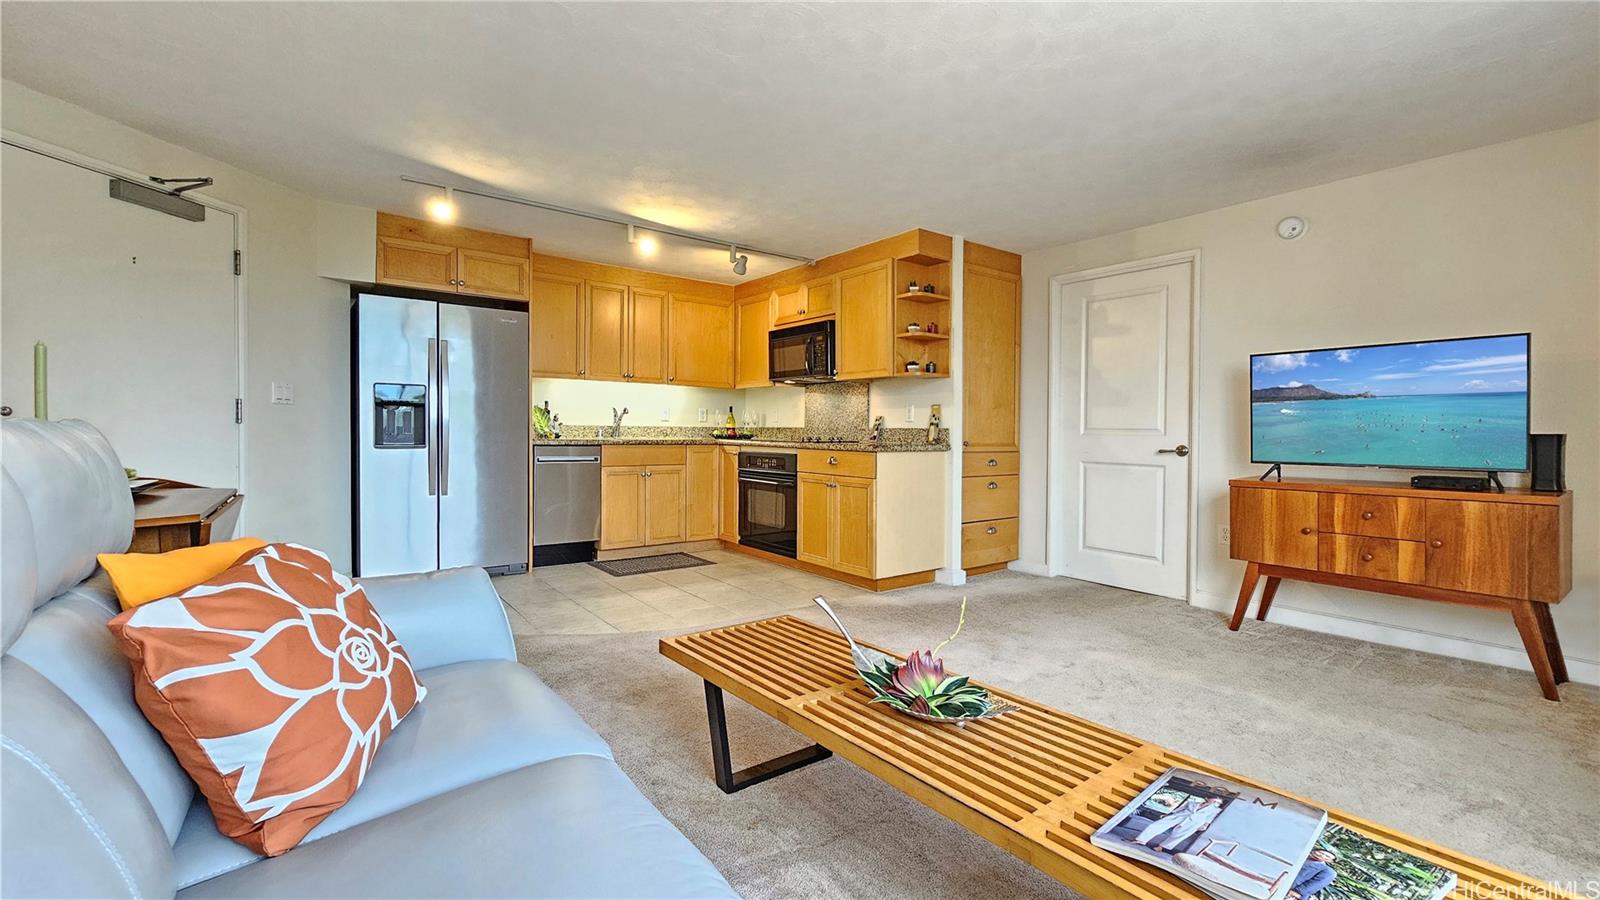 Welcome to this well-maintained and immaculate unit!